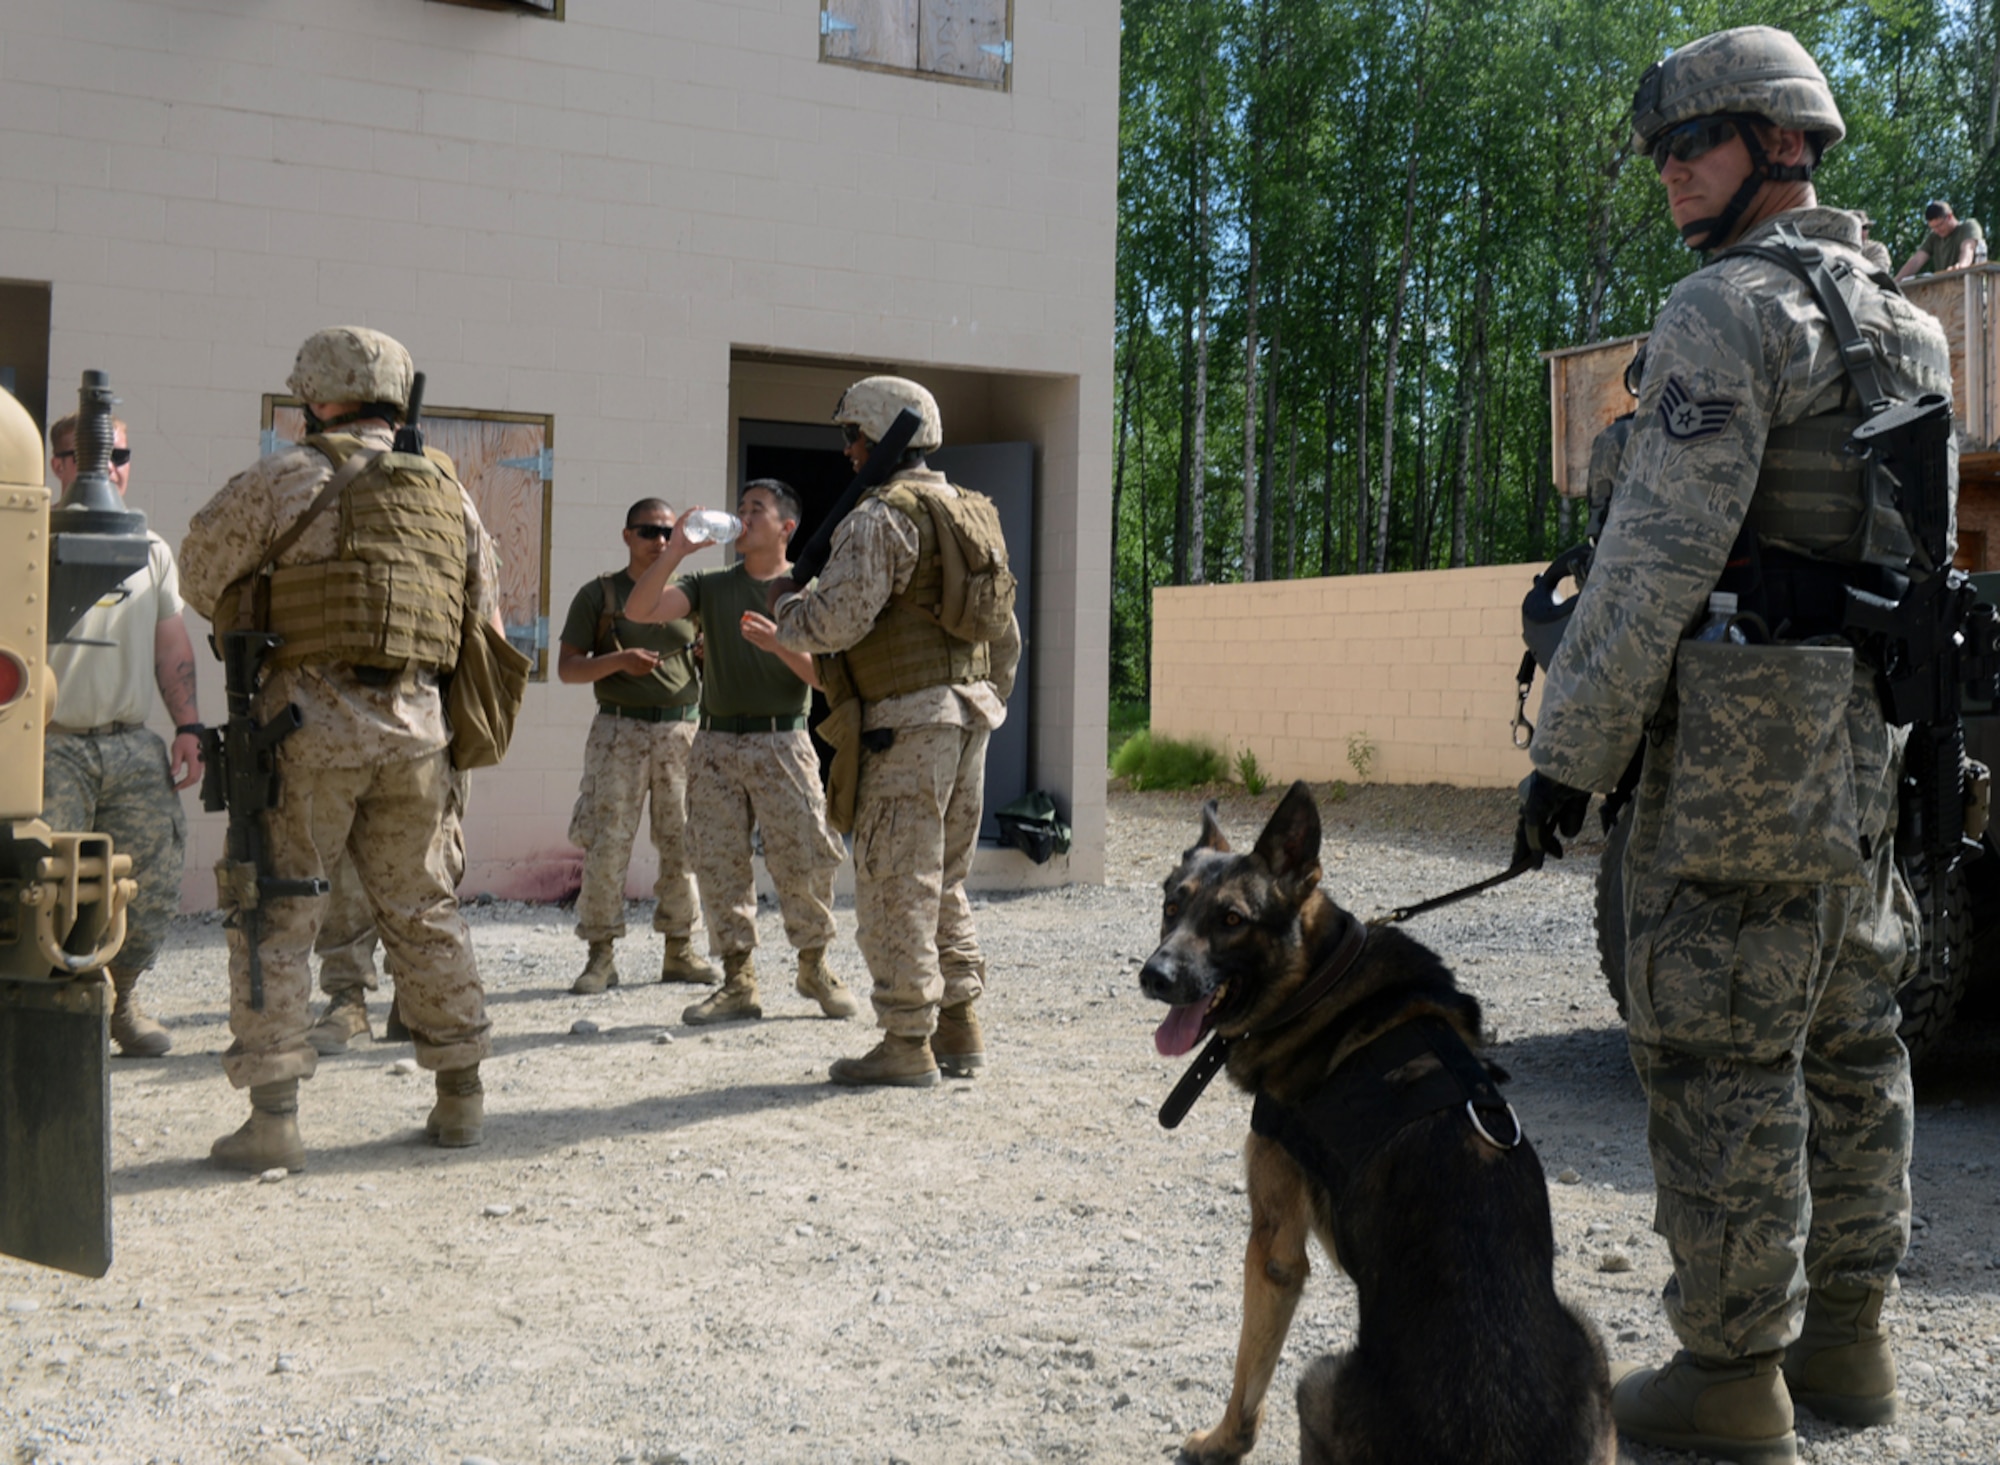 JOINT BASE ELMENDORF-RICHARDSON, Alaska --Air Force Staff Sgt. Gregory Maata, 673d Security Forces Squadron military dog handler and Military Working Dog Sandor observe Marine service members during the Marine military police training at the Baumeister training ground June 24. The training was done to prepare them for their migration into the military police field. The training spanned 14 days and reviewed concepts such as rules of engagement and use of force when in a foreign field. (U.S. Air Force photo/Airman 1st Class Ty-Rico Lea)